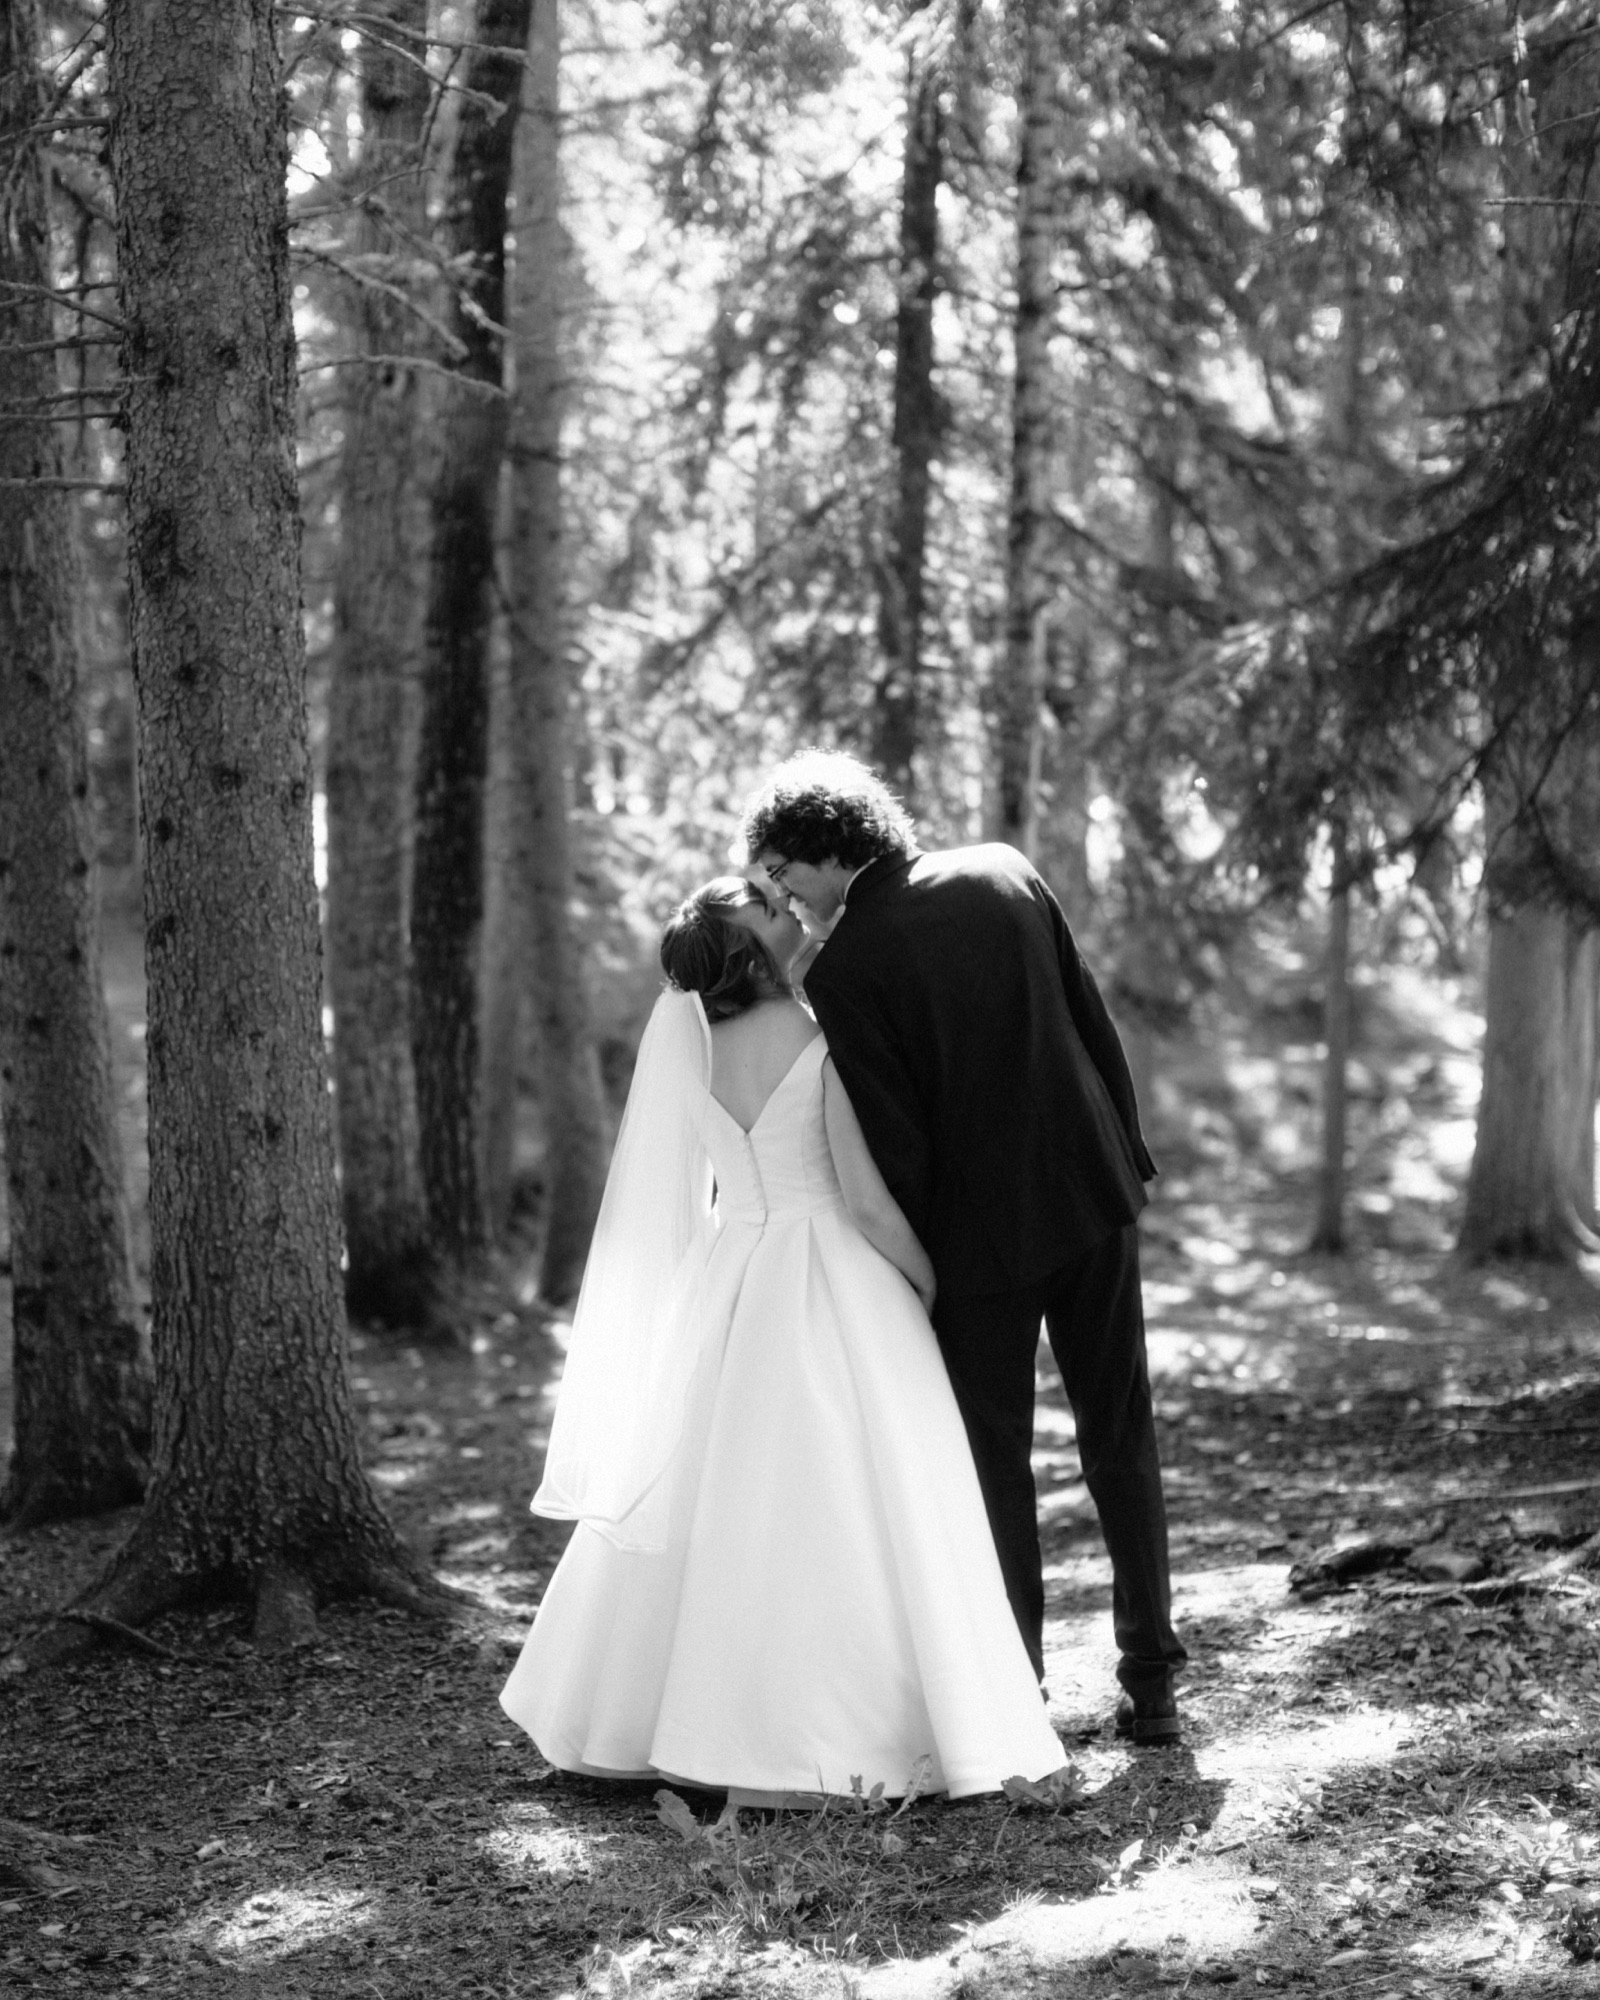 Romantic black and white couple wedding portraits in an Alberta forest